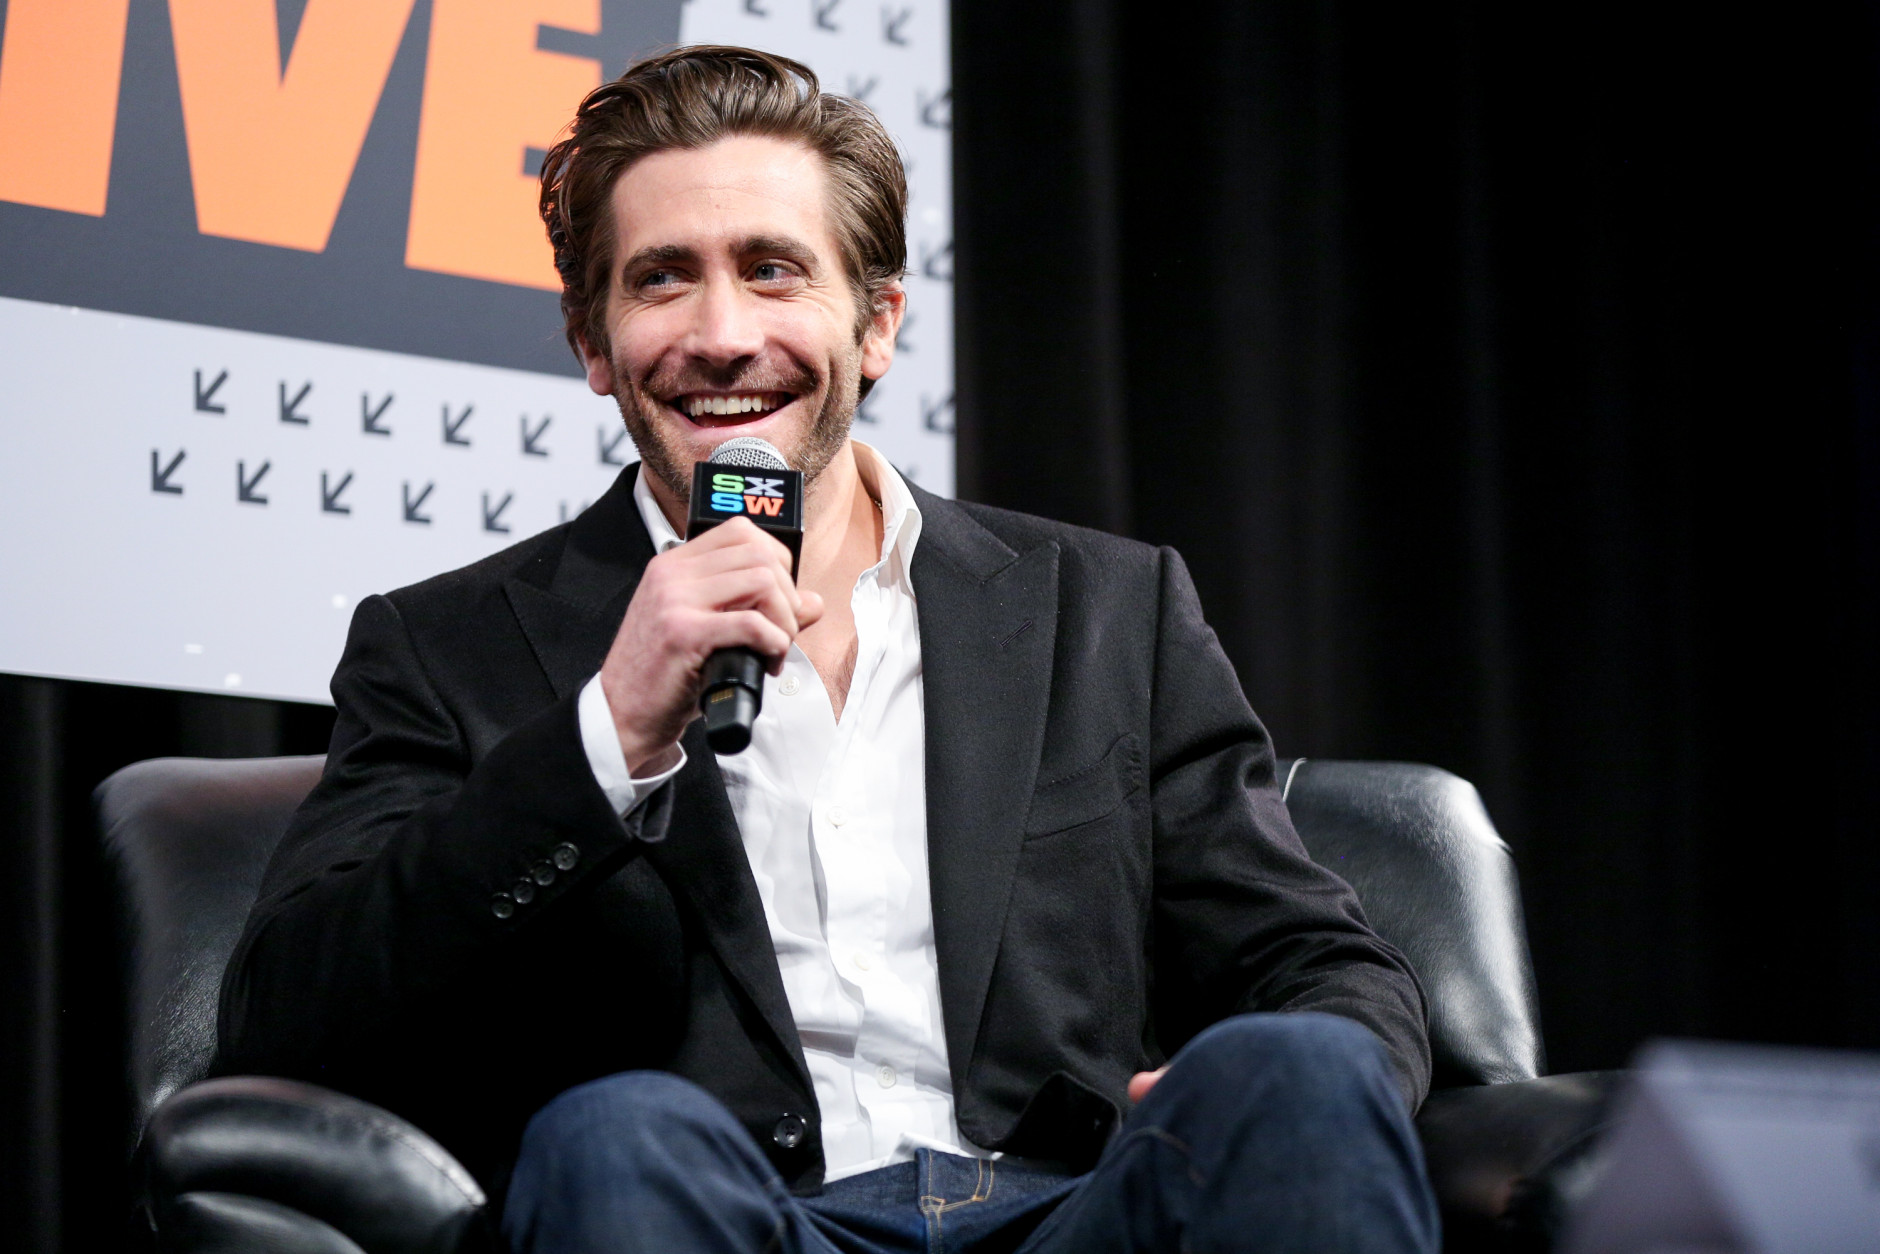 Jake Gyllenhaal speaks during South By Southwest at the Austin Convention Center on Saturday, March 12, 2016, in Austin, Texas. (Photo by Rich Fury/Invision/AP)